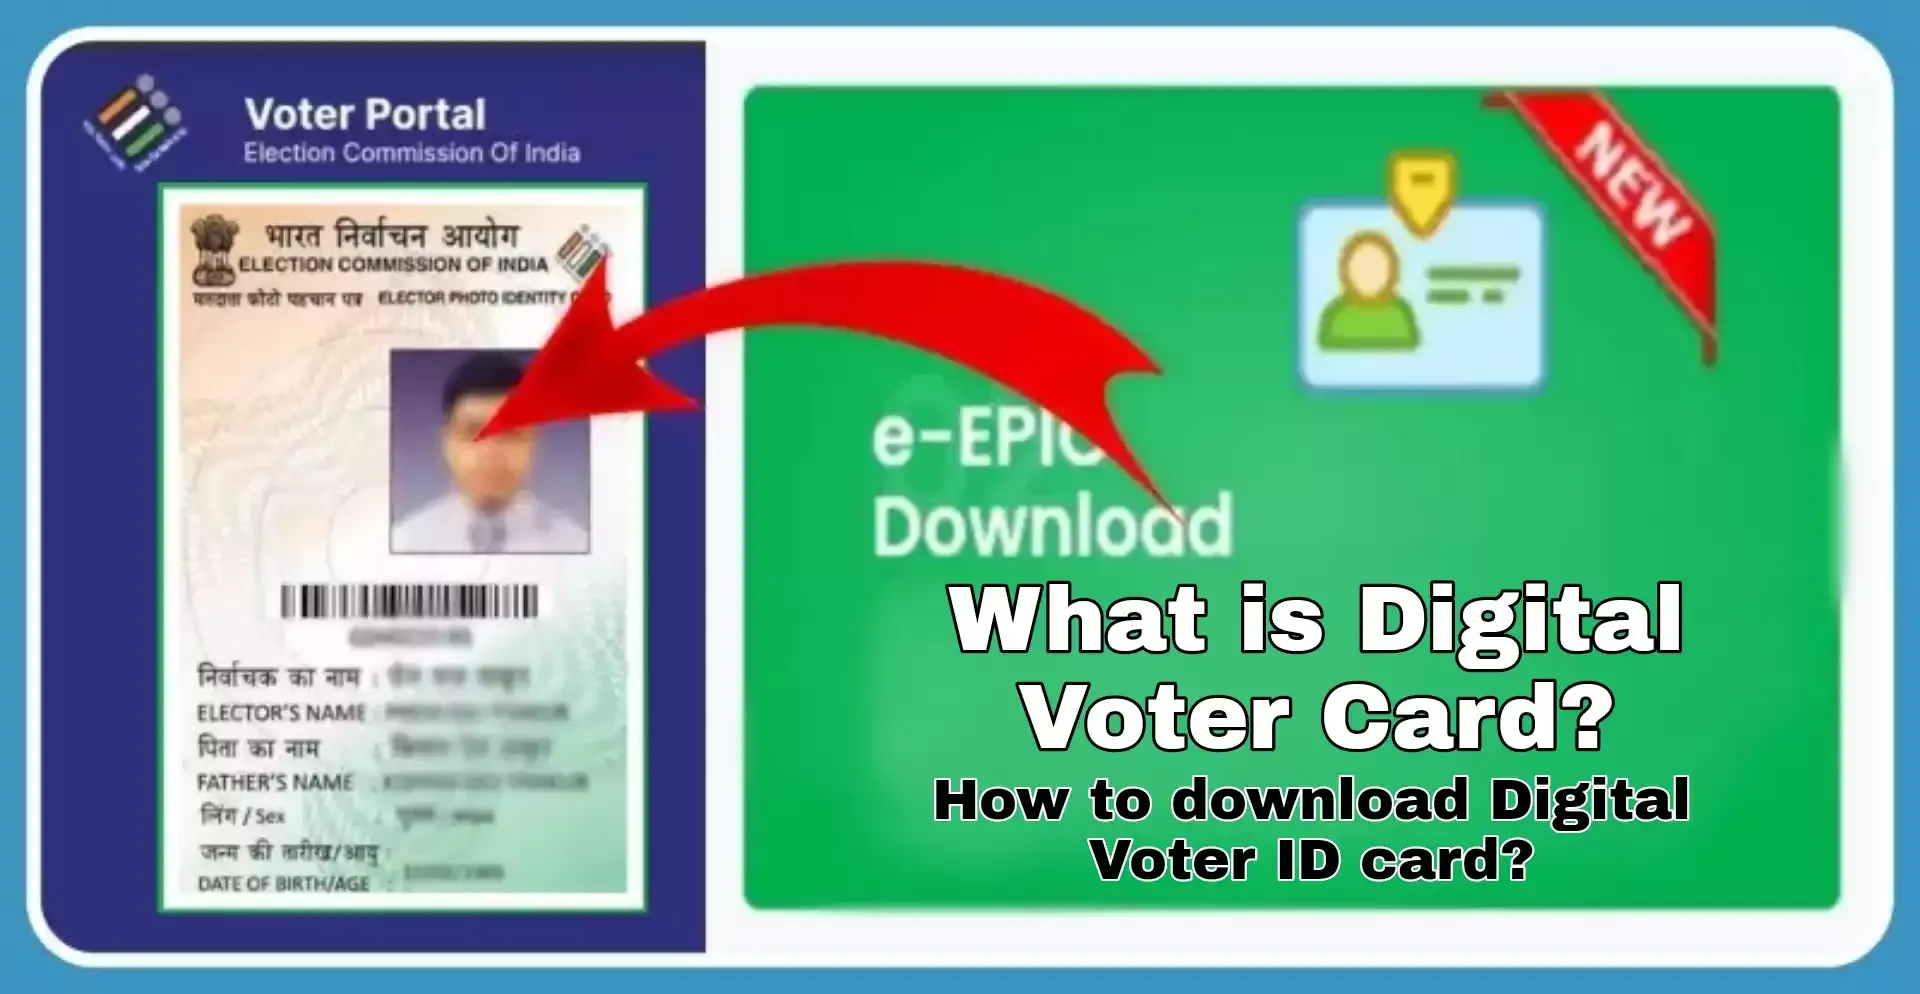 How to download Digital Voter ID card?